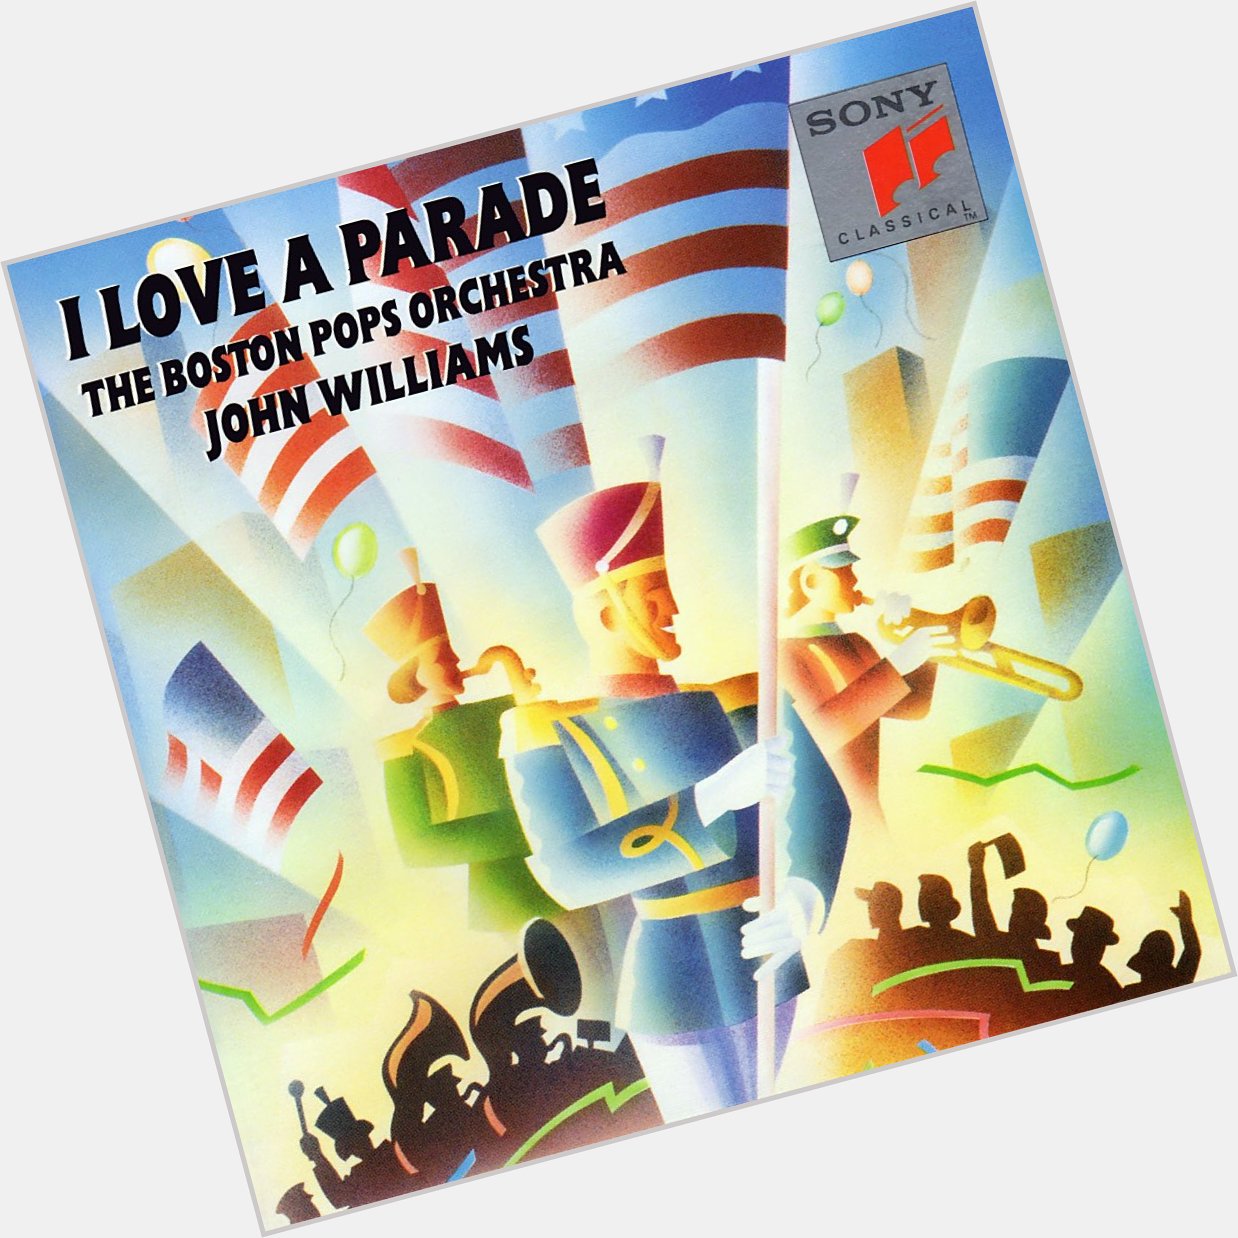 John Williams is 86 today! I ve been playing I LOVE A PARADE in his honour all day. Happy birthday!  